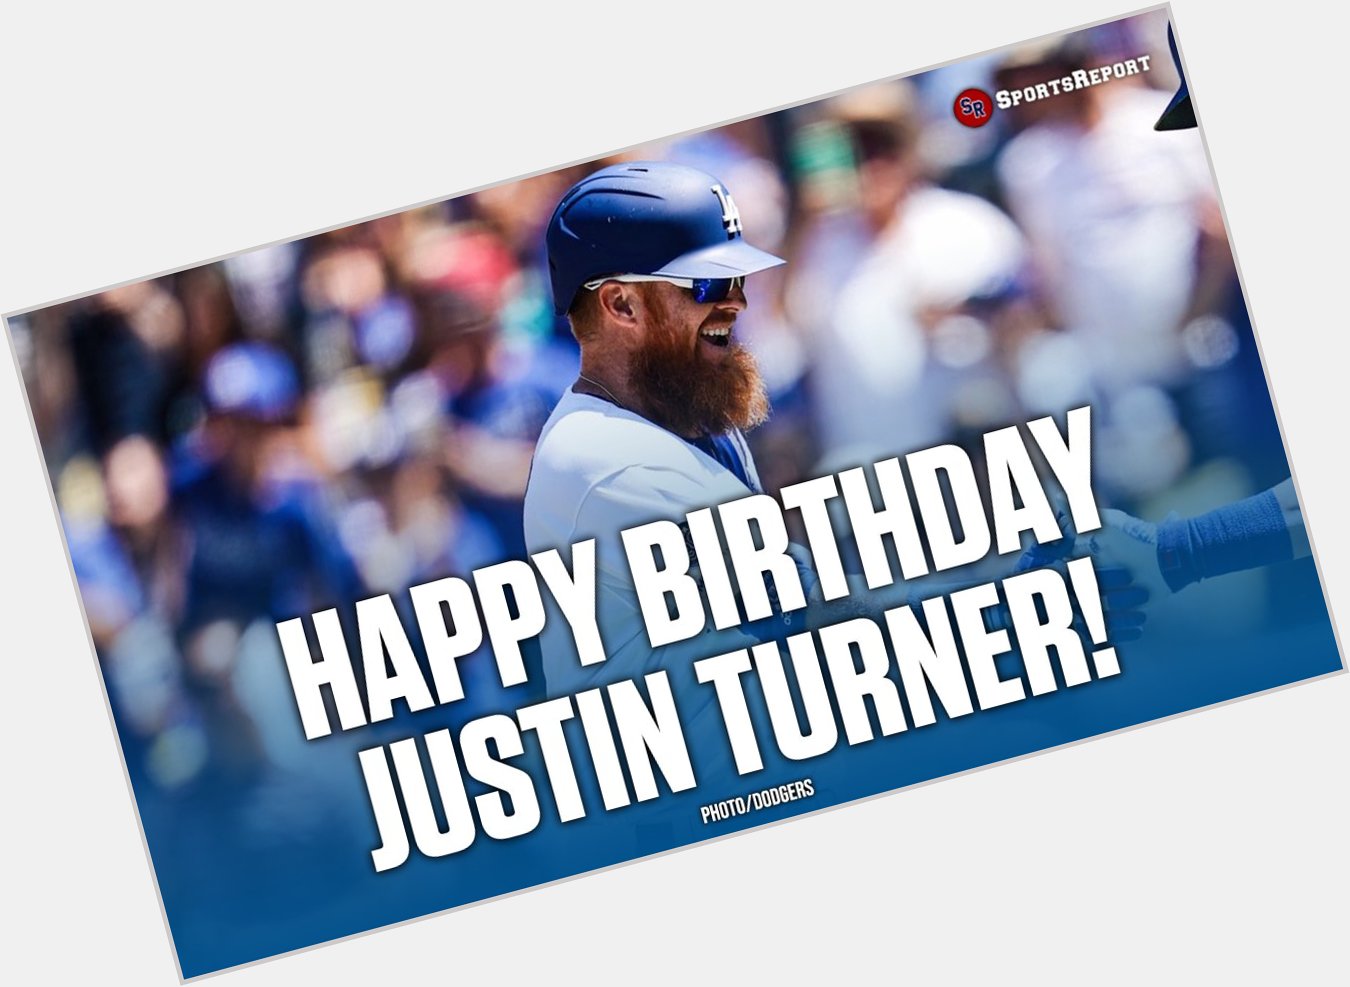  Fans, let\s wish Justin Turner a Happy Birthday! GO DODGERS!! 